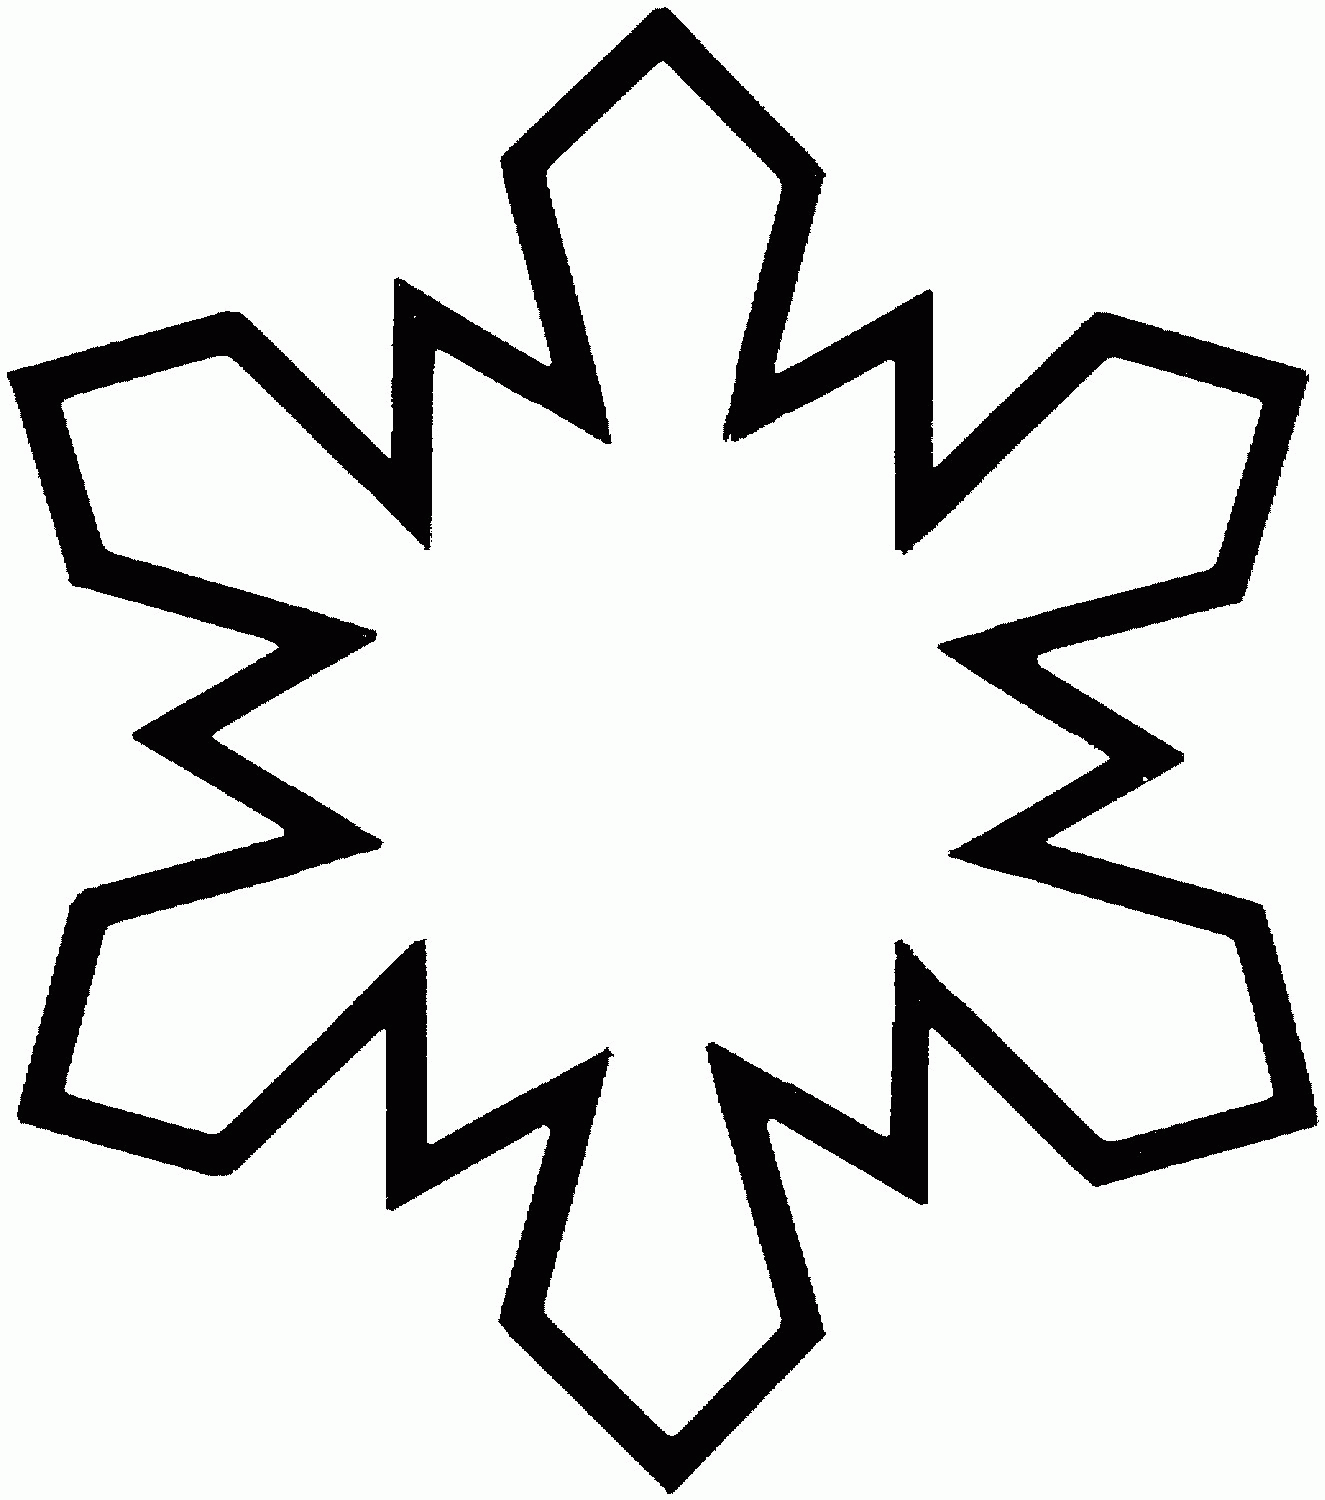 Coloring Pages Snowflakes - Coloring Page